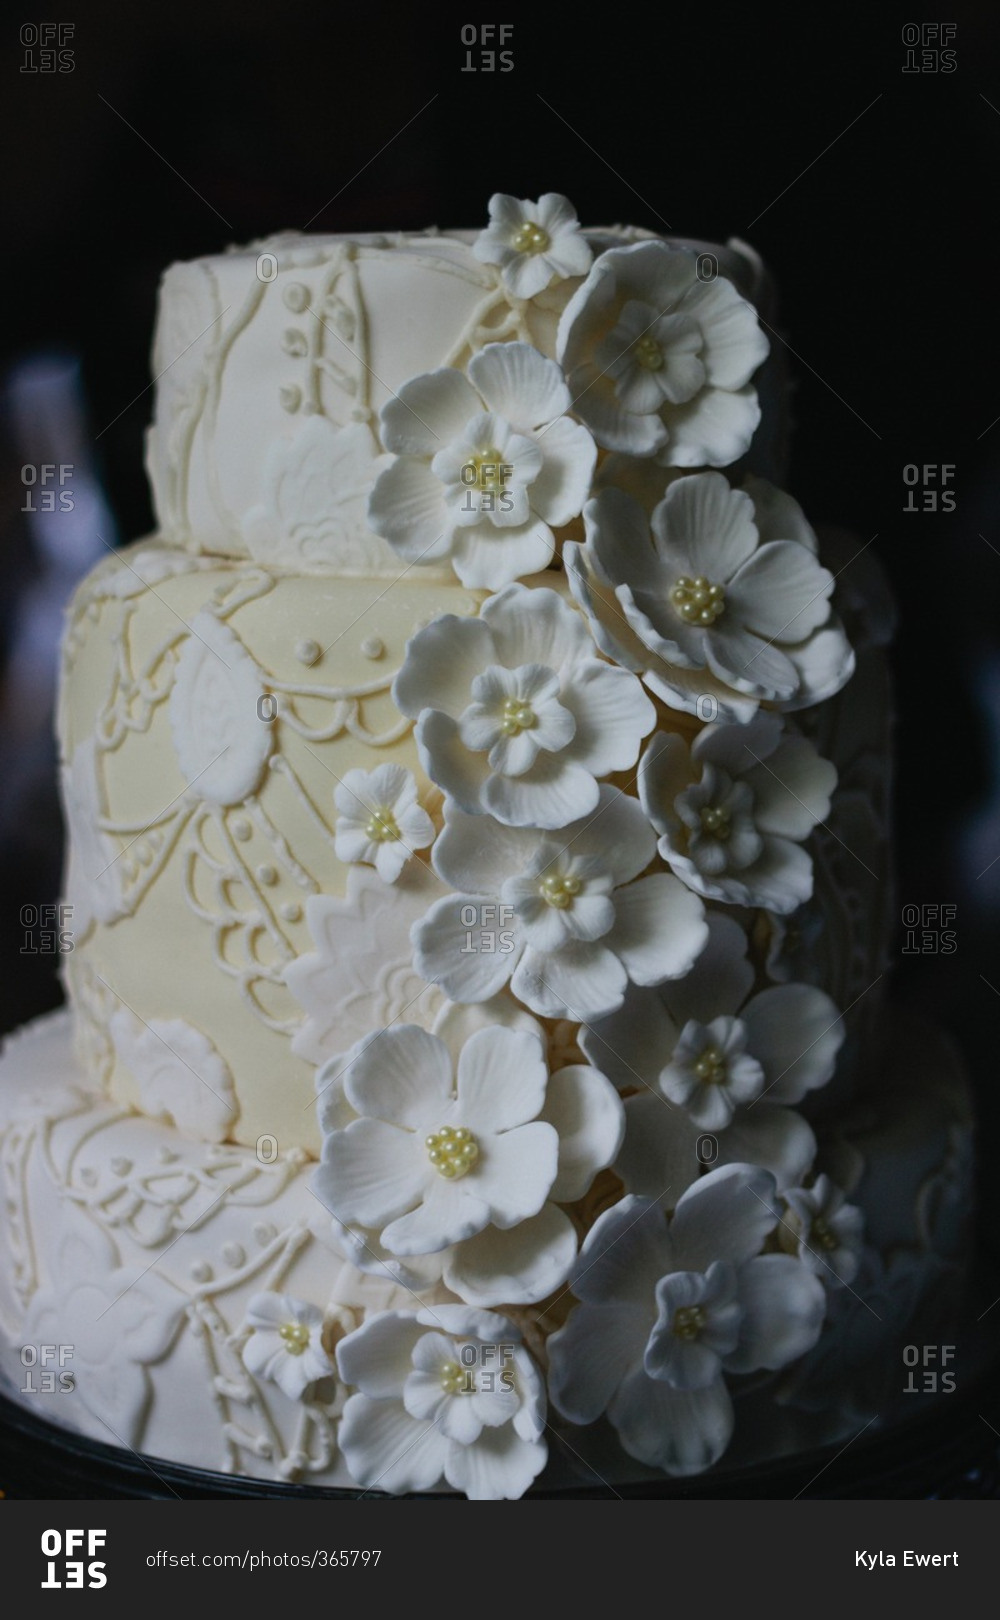 Floral wedding cake in close up